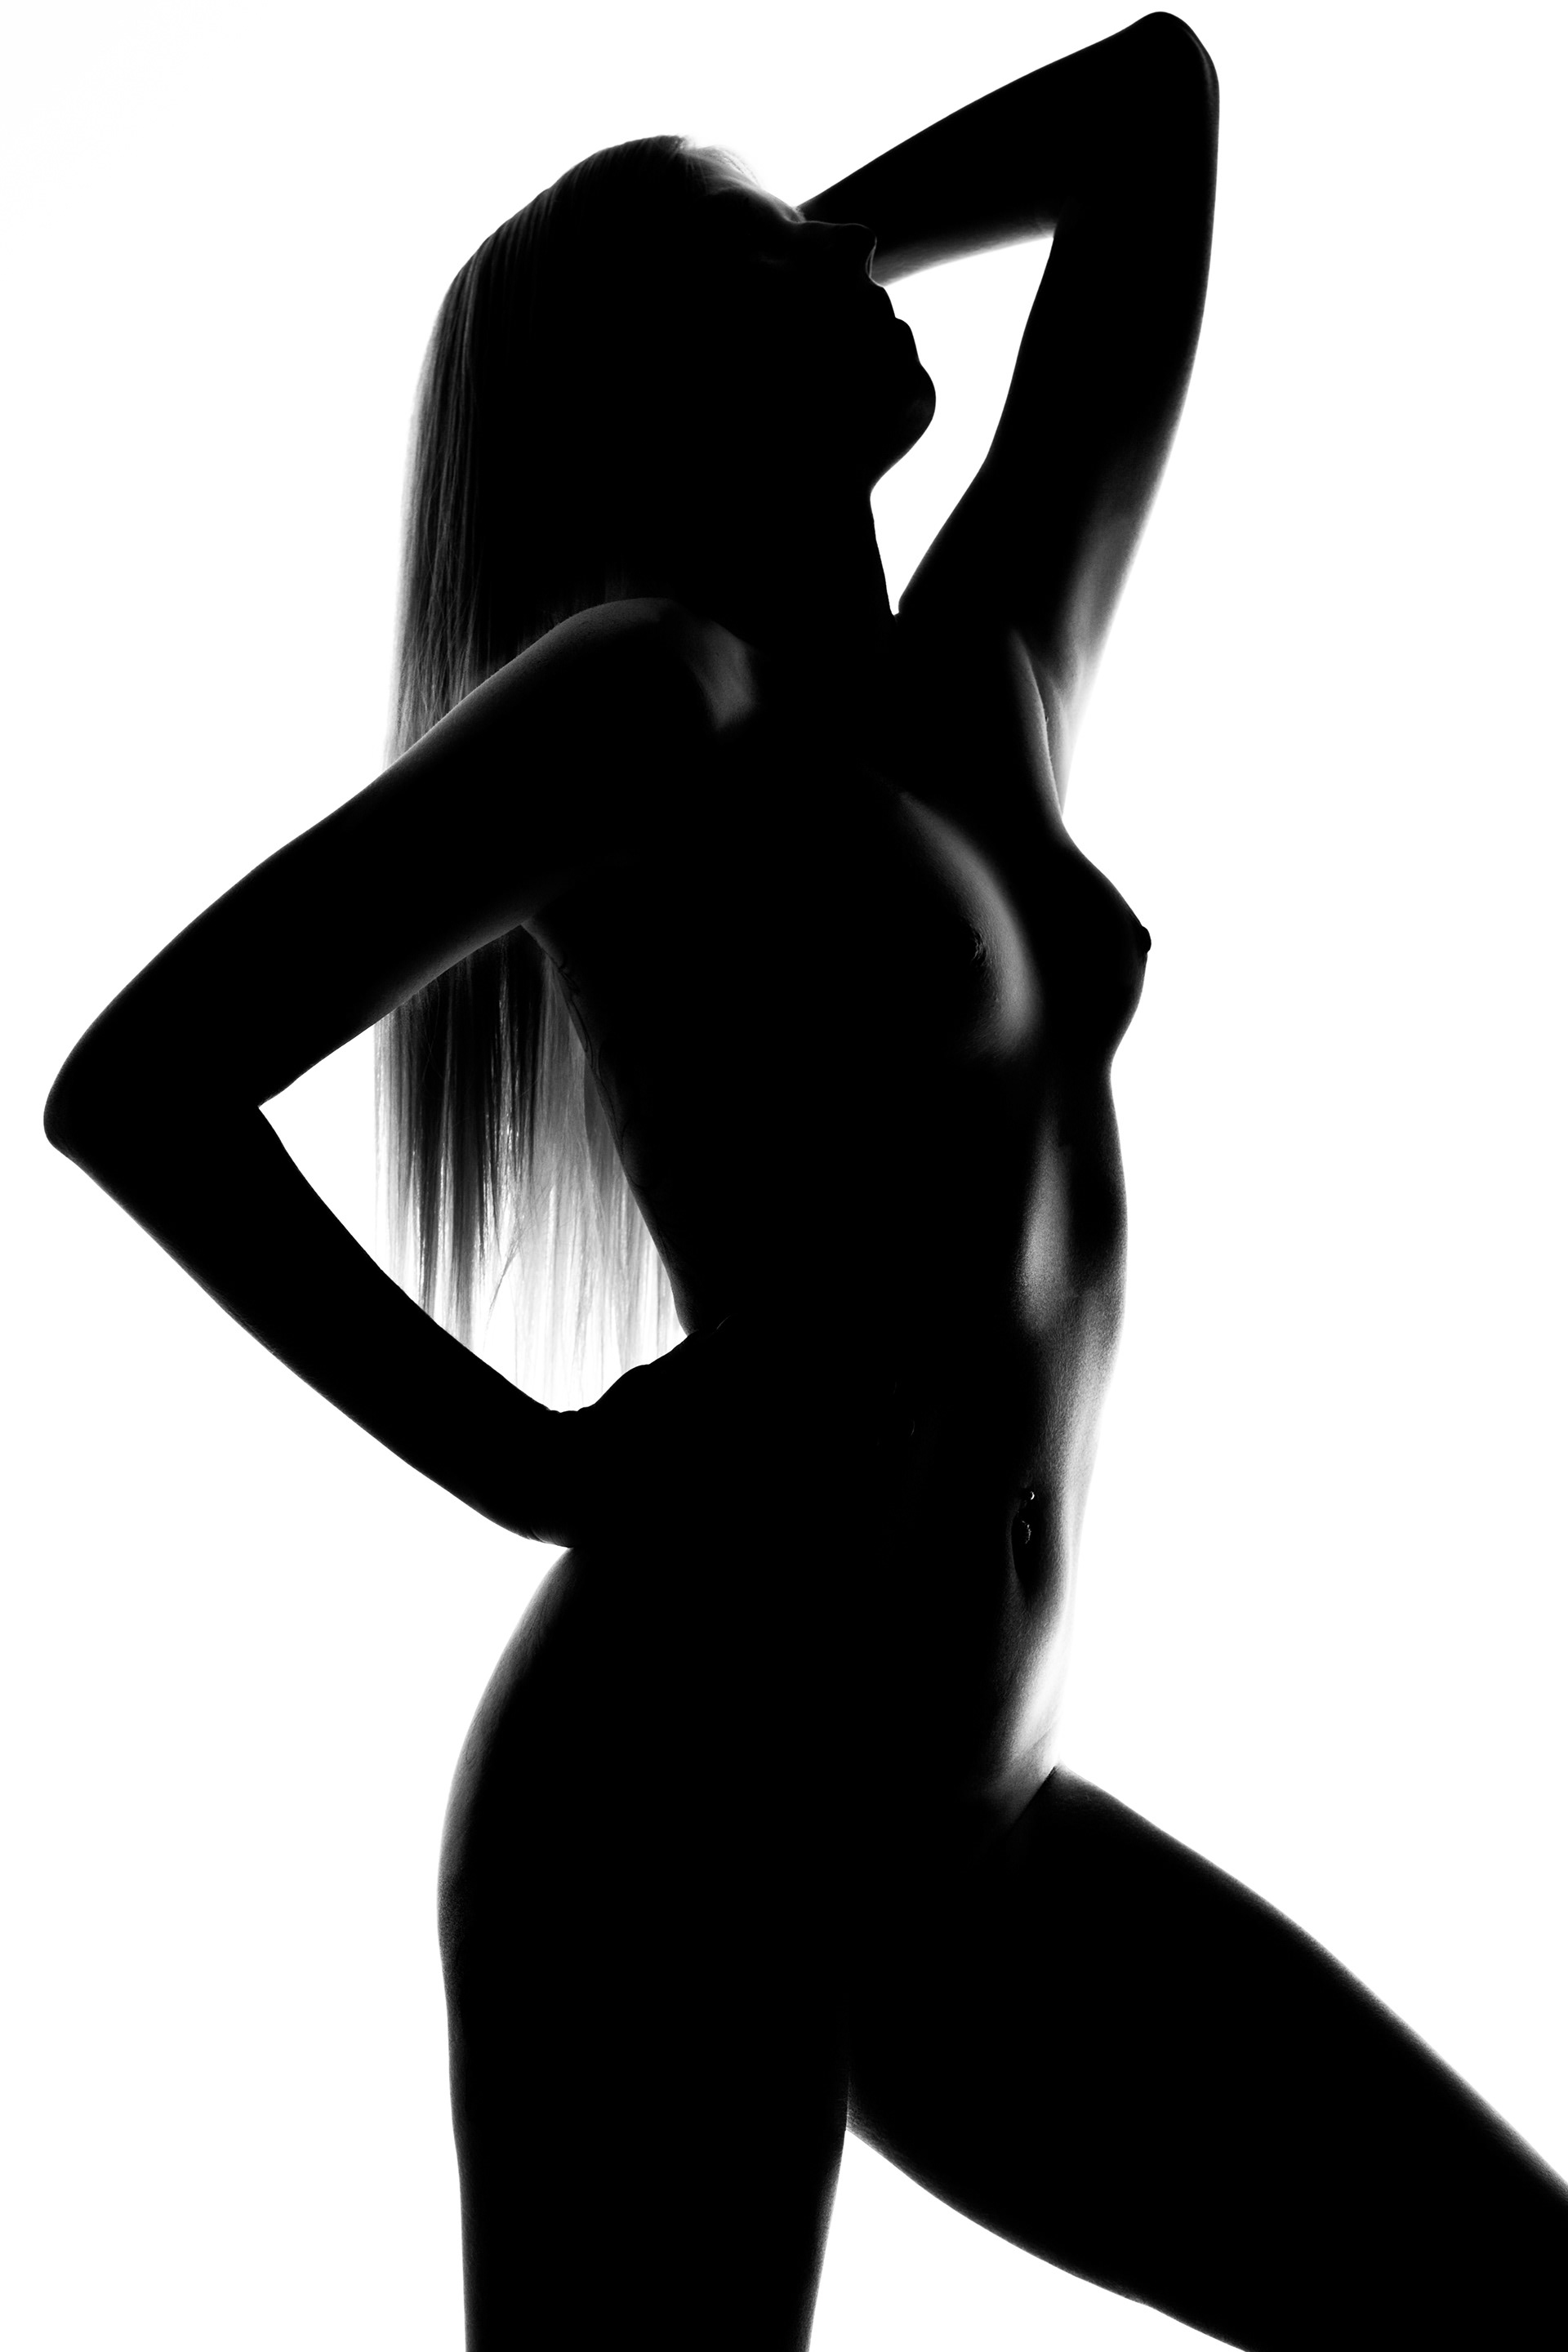 Collection of various artistic nude silhouette shoots. 